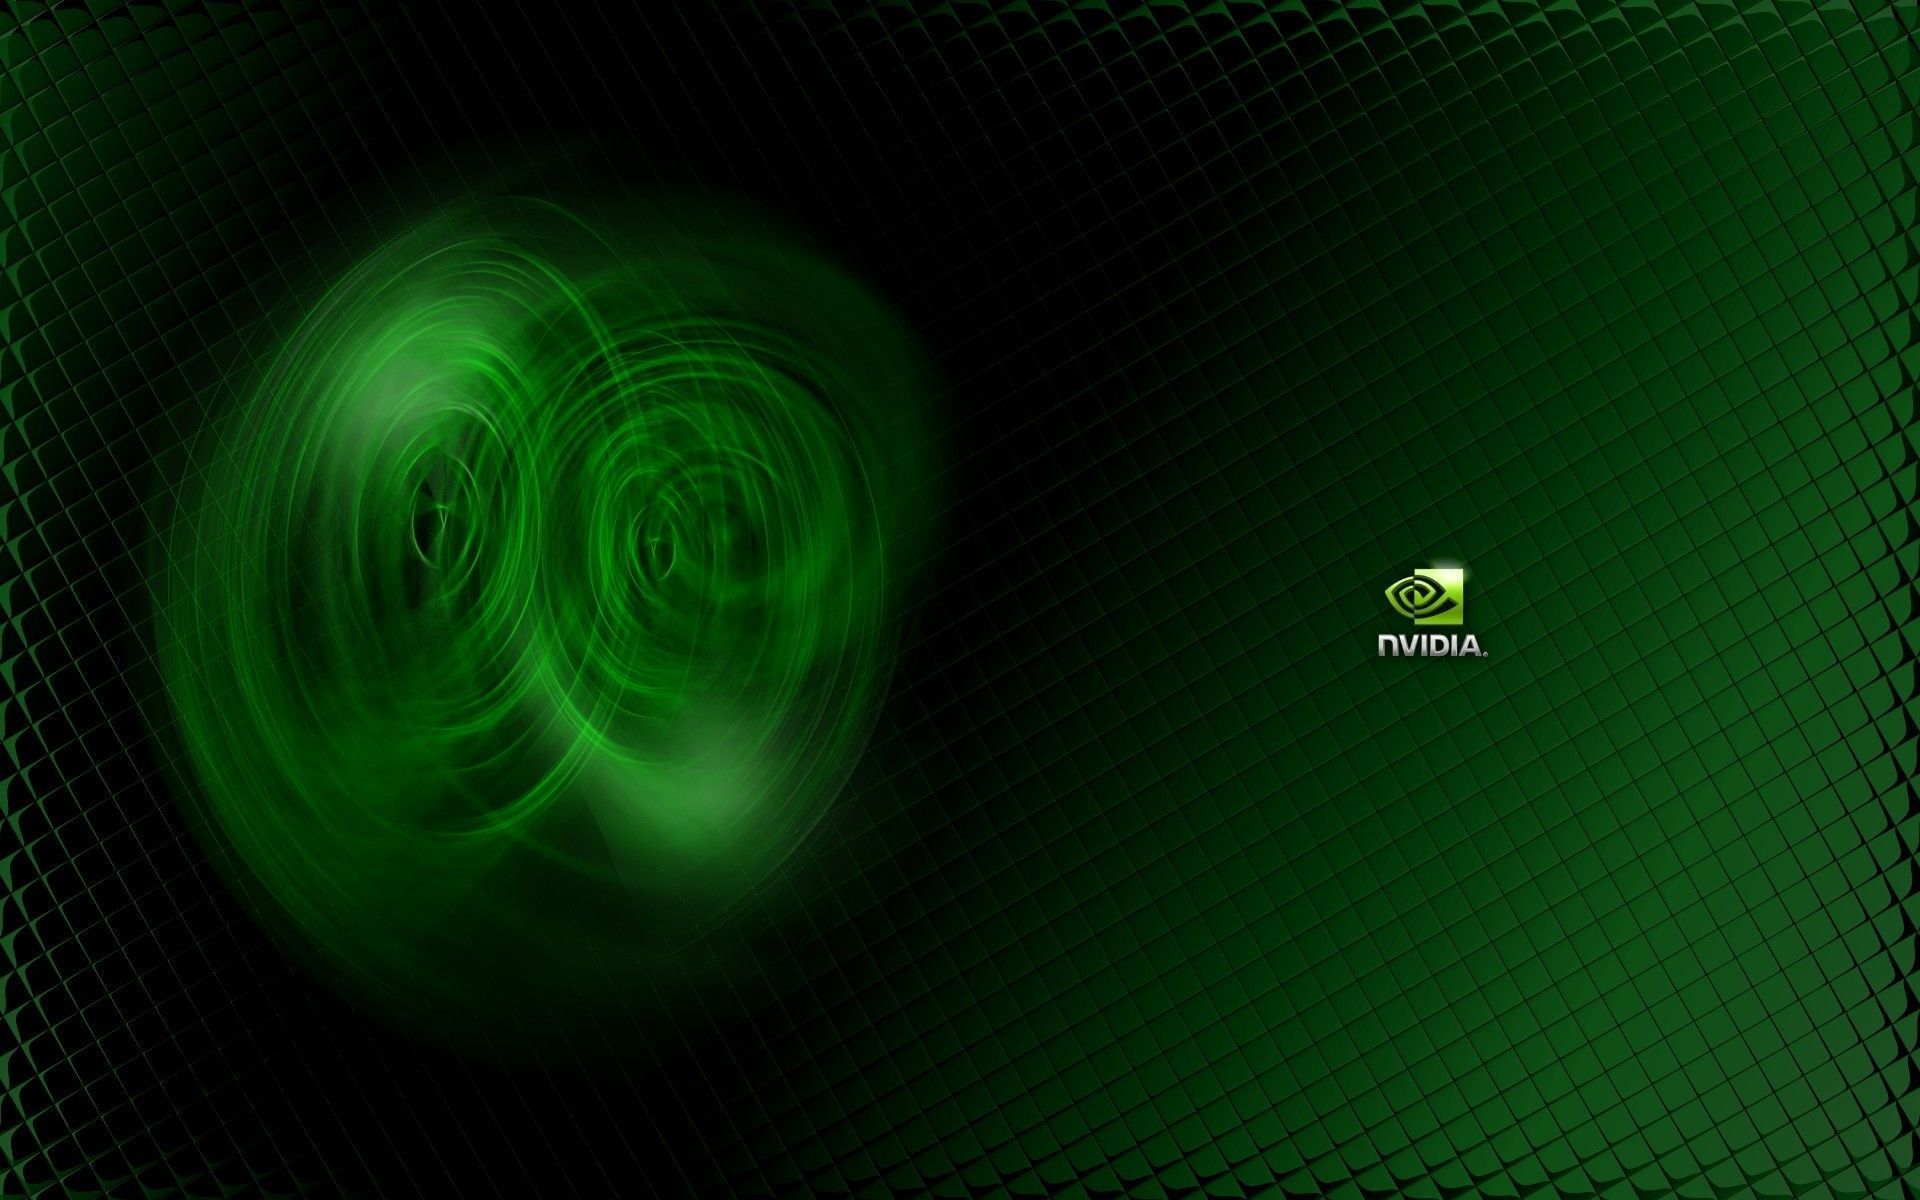 Top Download Nvidia Hd Wallpaper Images for Pinterest